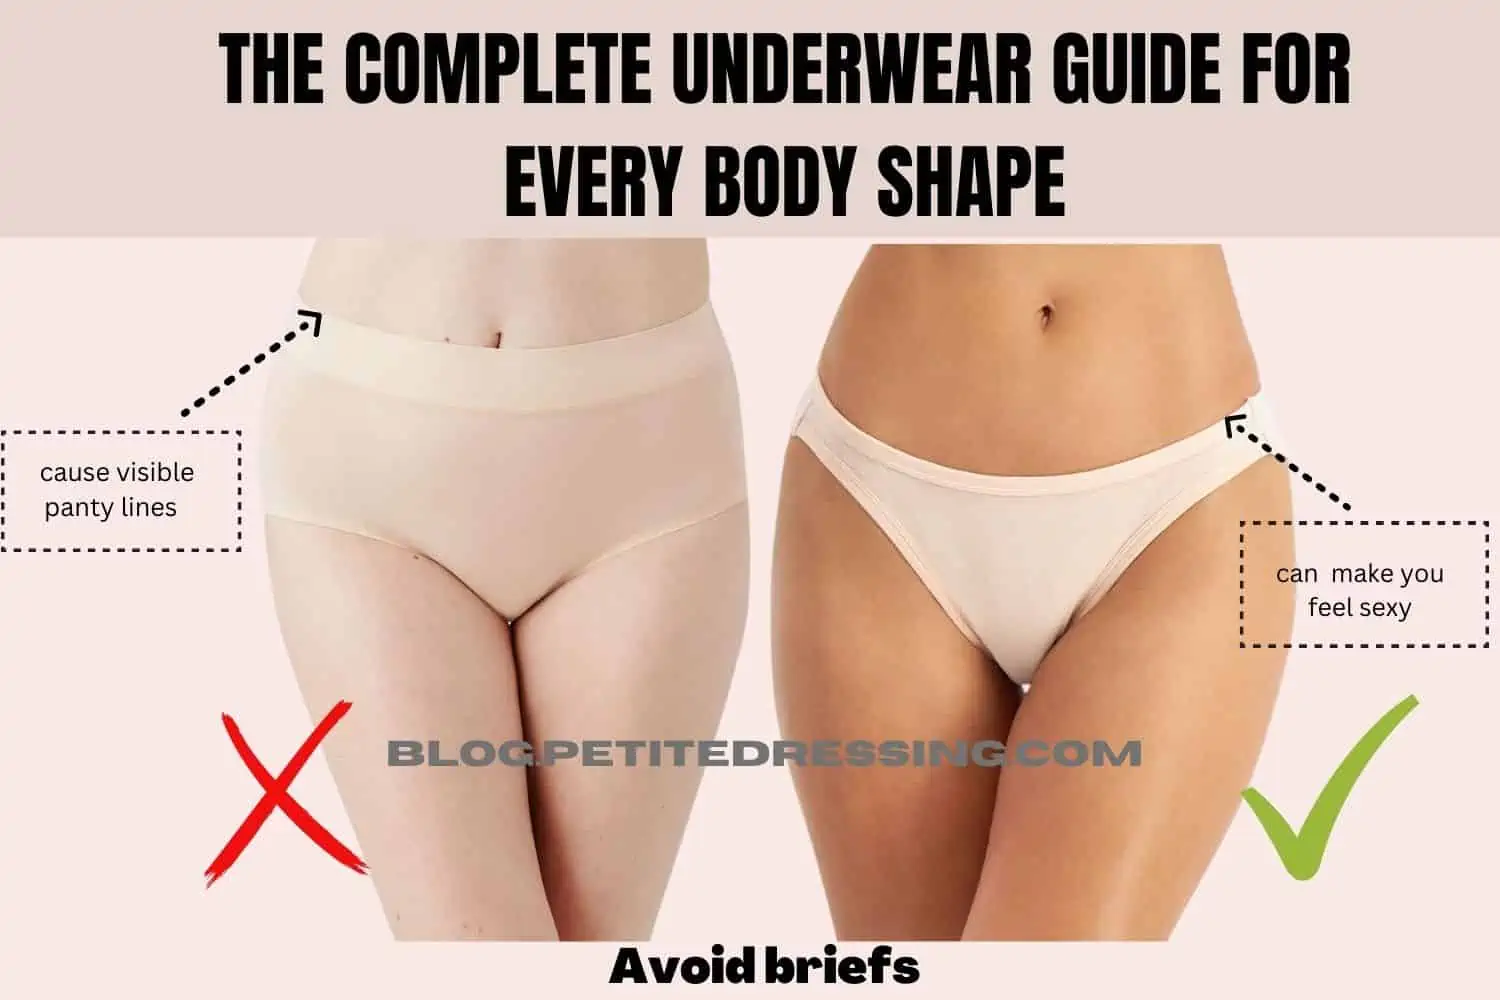 The Complete Underwear Guide For Every Body Shape - Petite Dressing